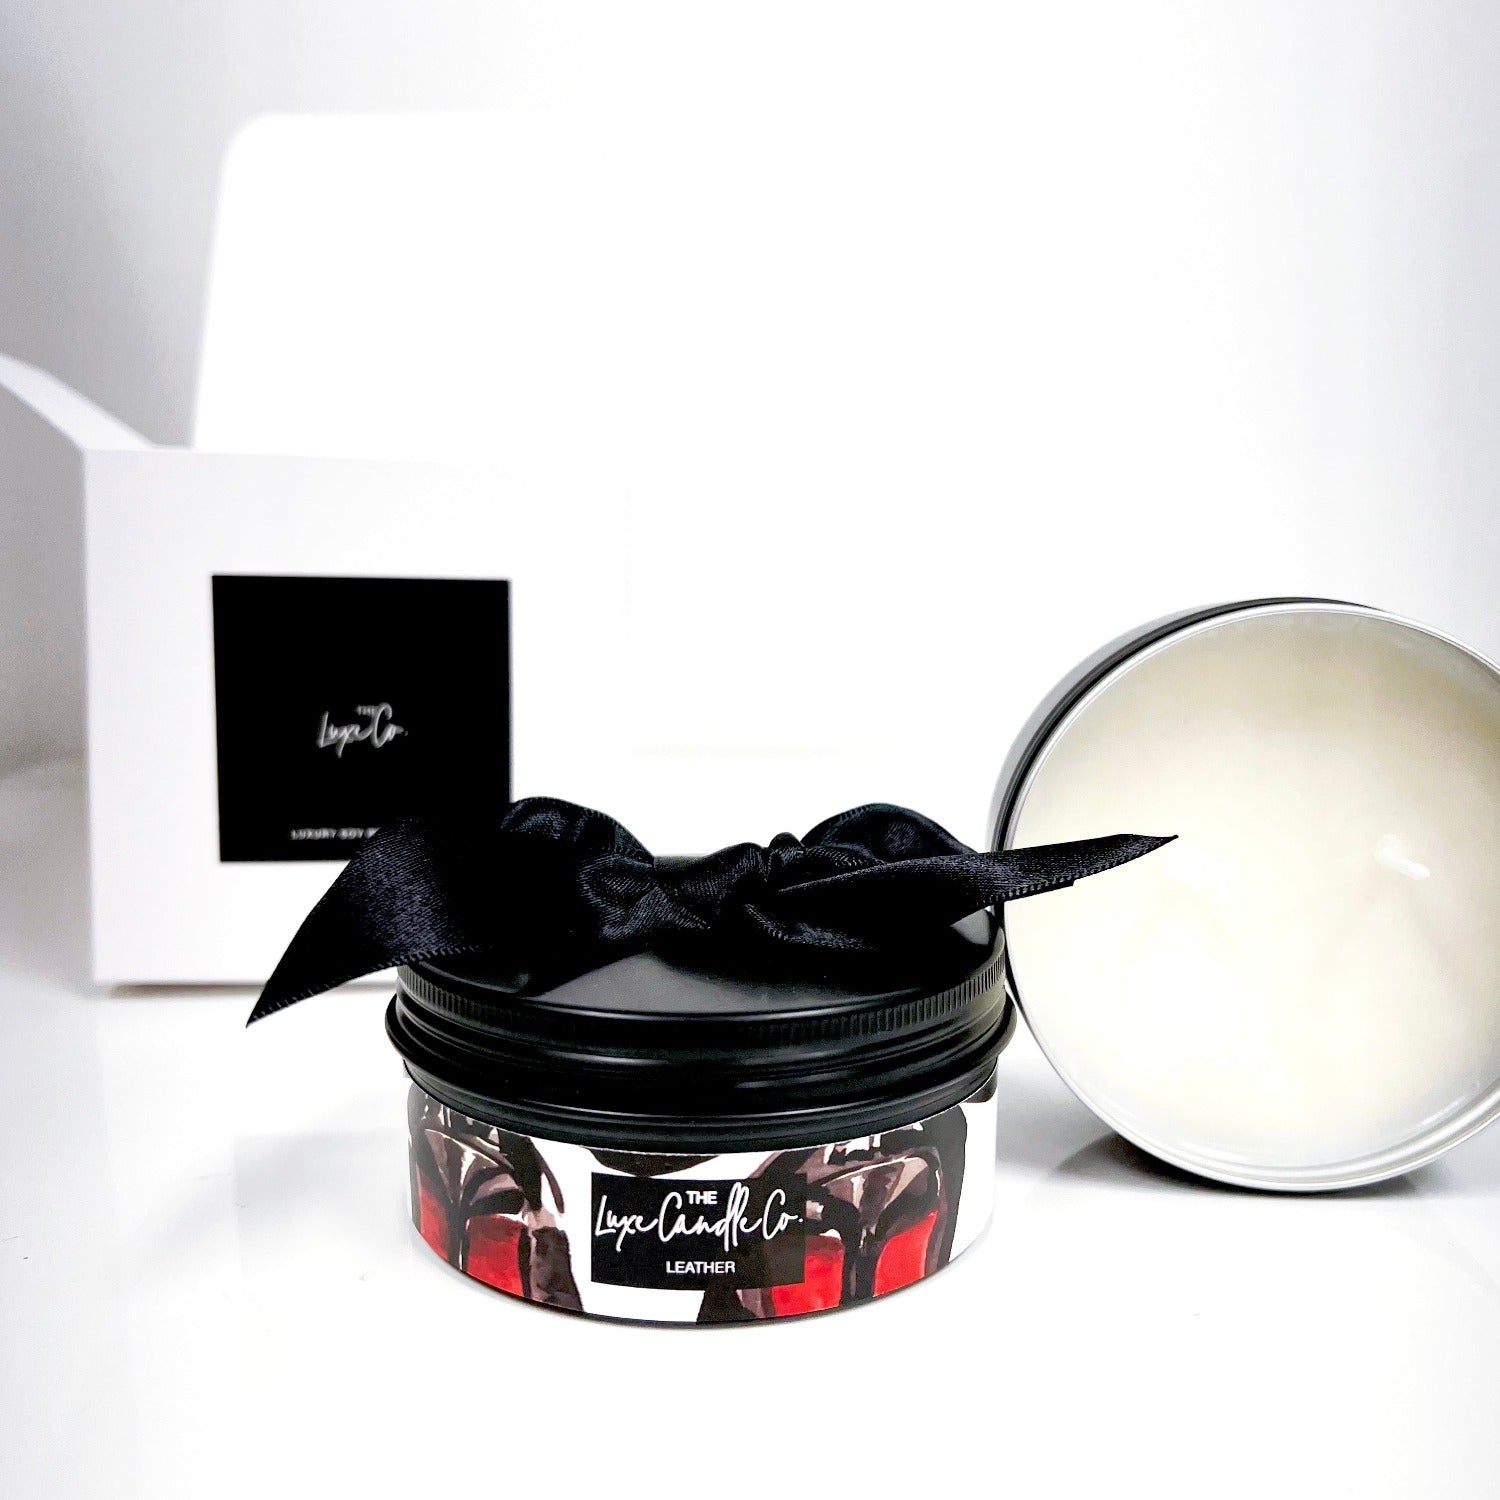 Louboutin leather valentines candle to match cards